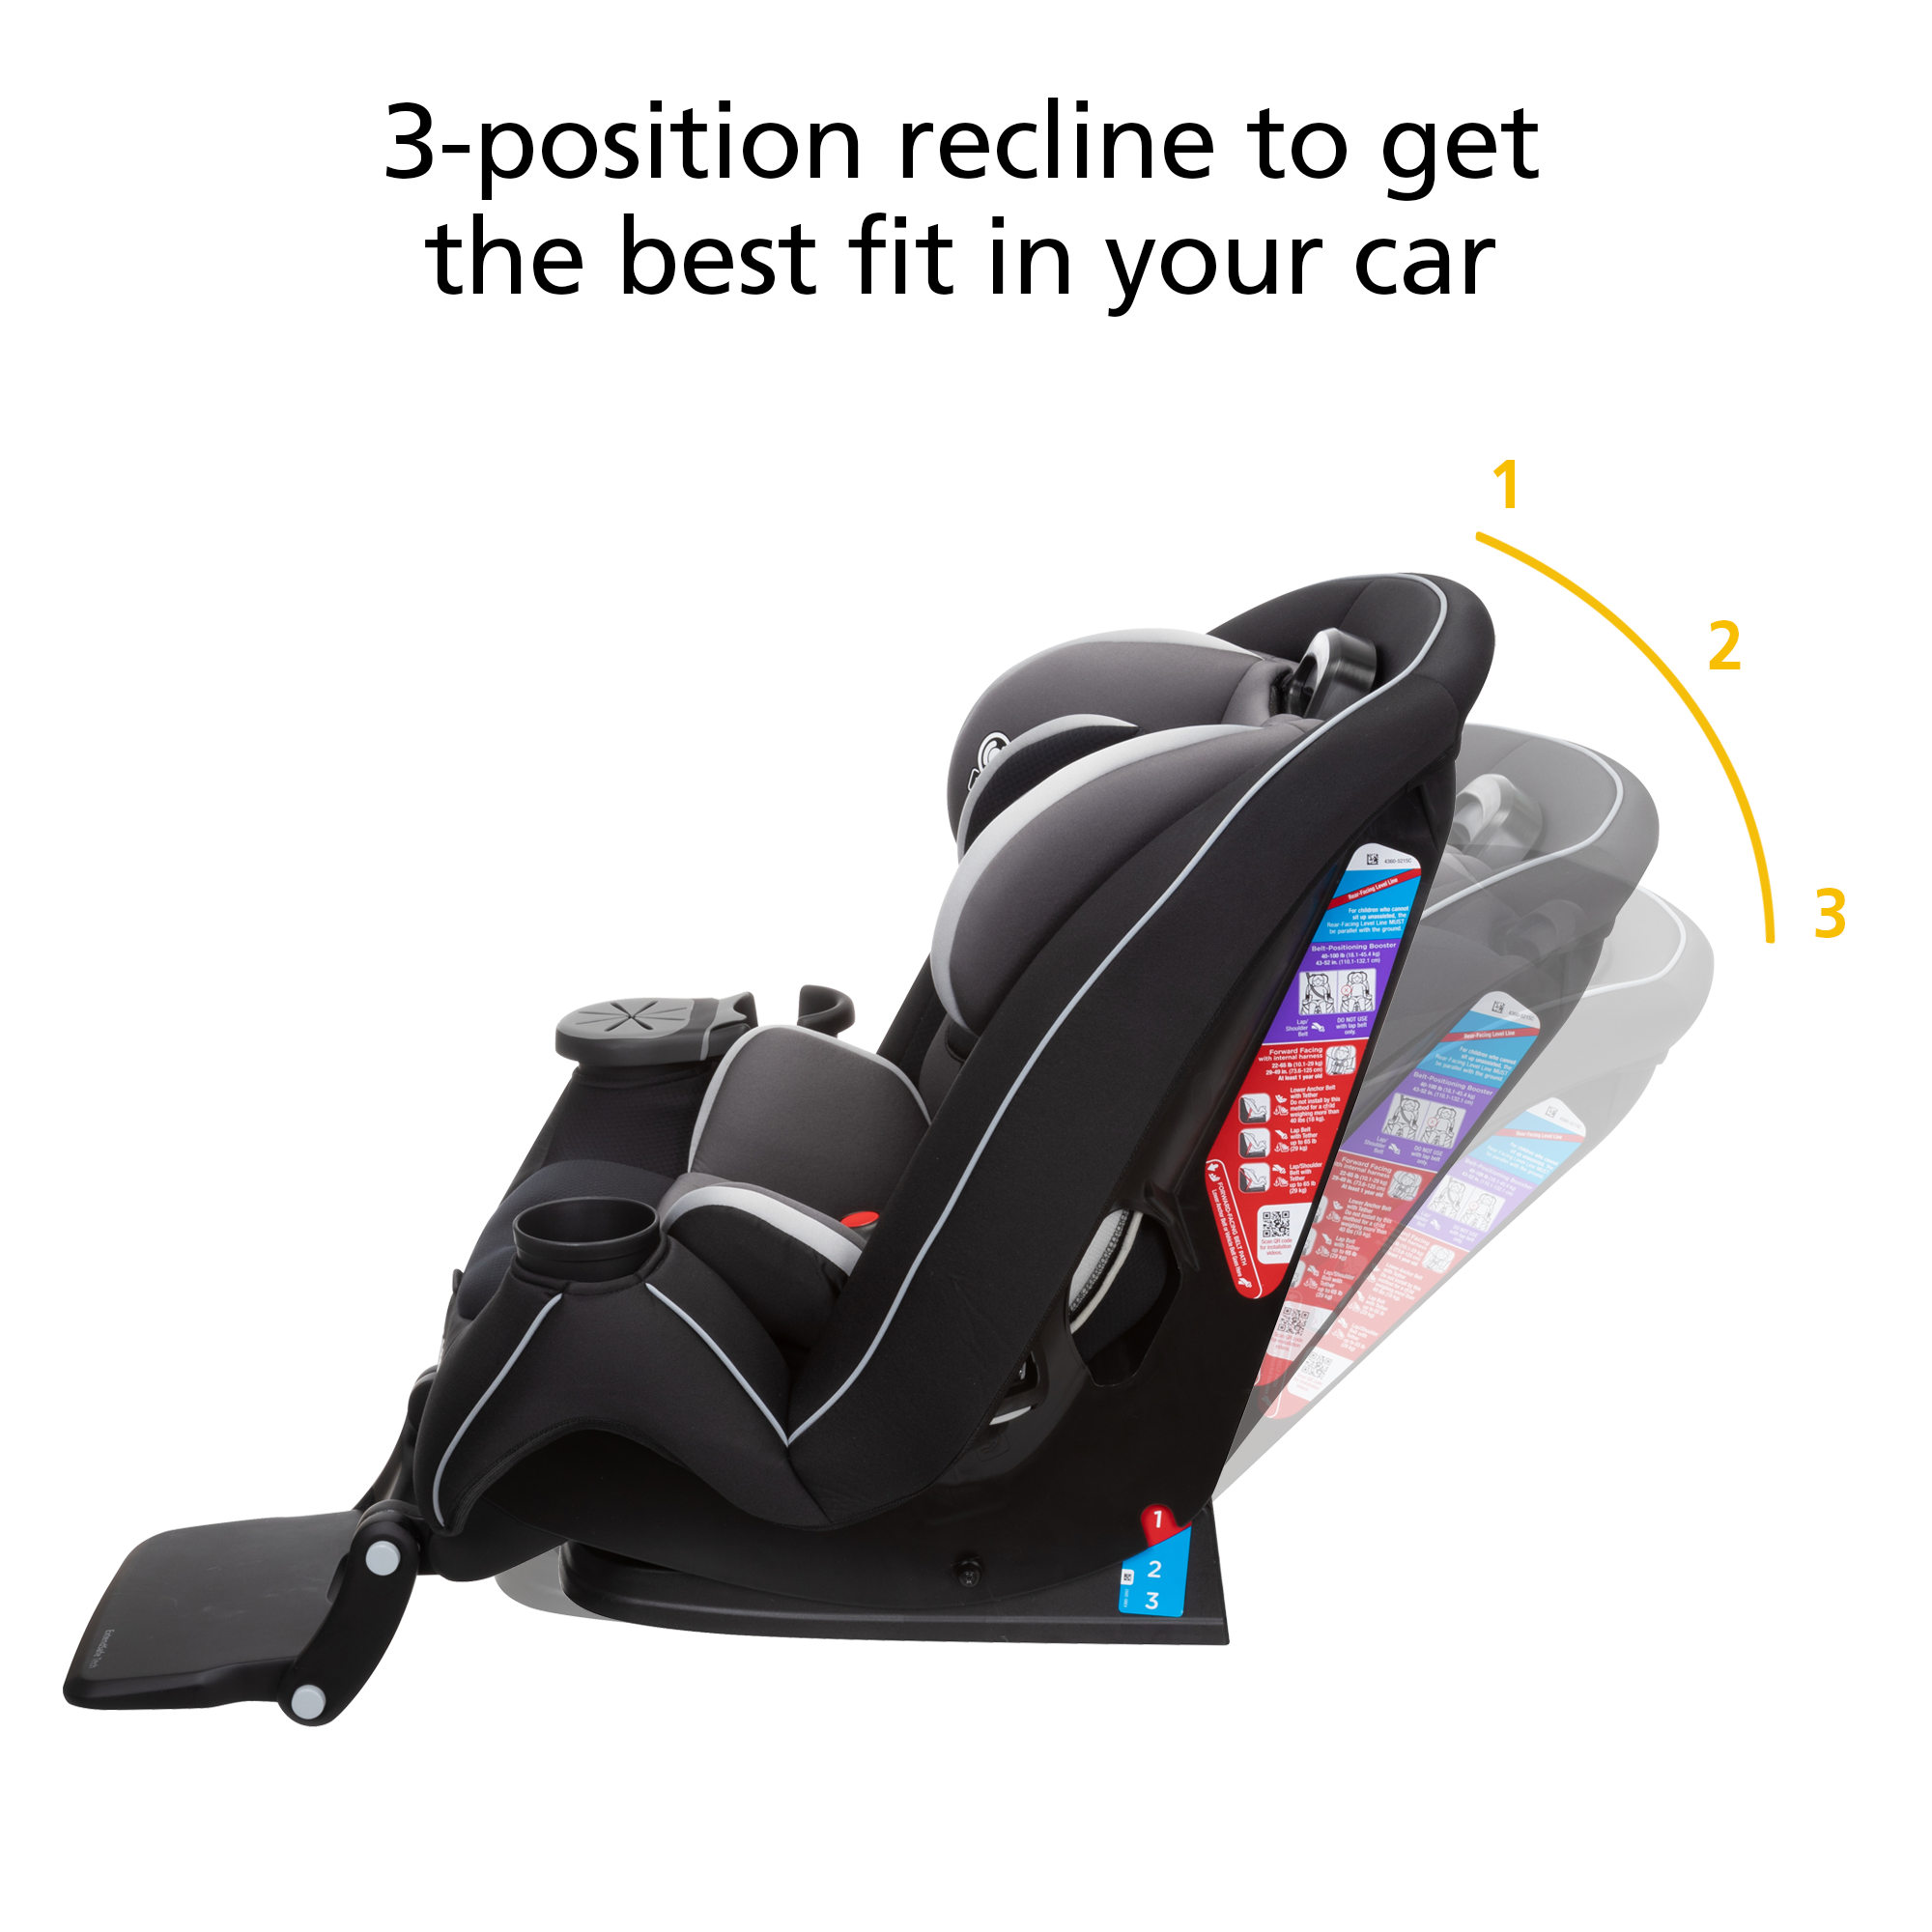 Grow and Go™ Extend 'n Ride LX - 3-position recline to get the best fit in your car